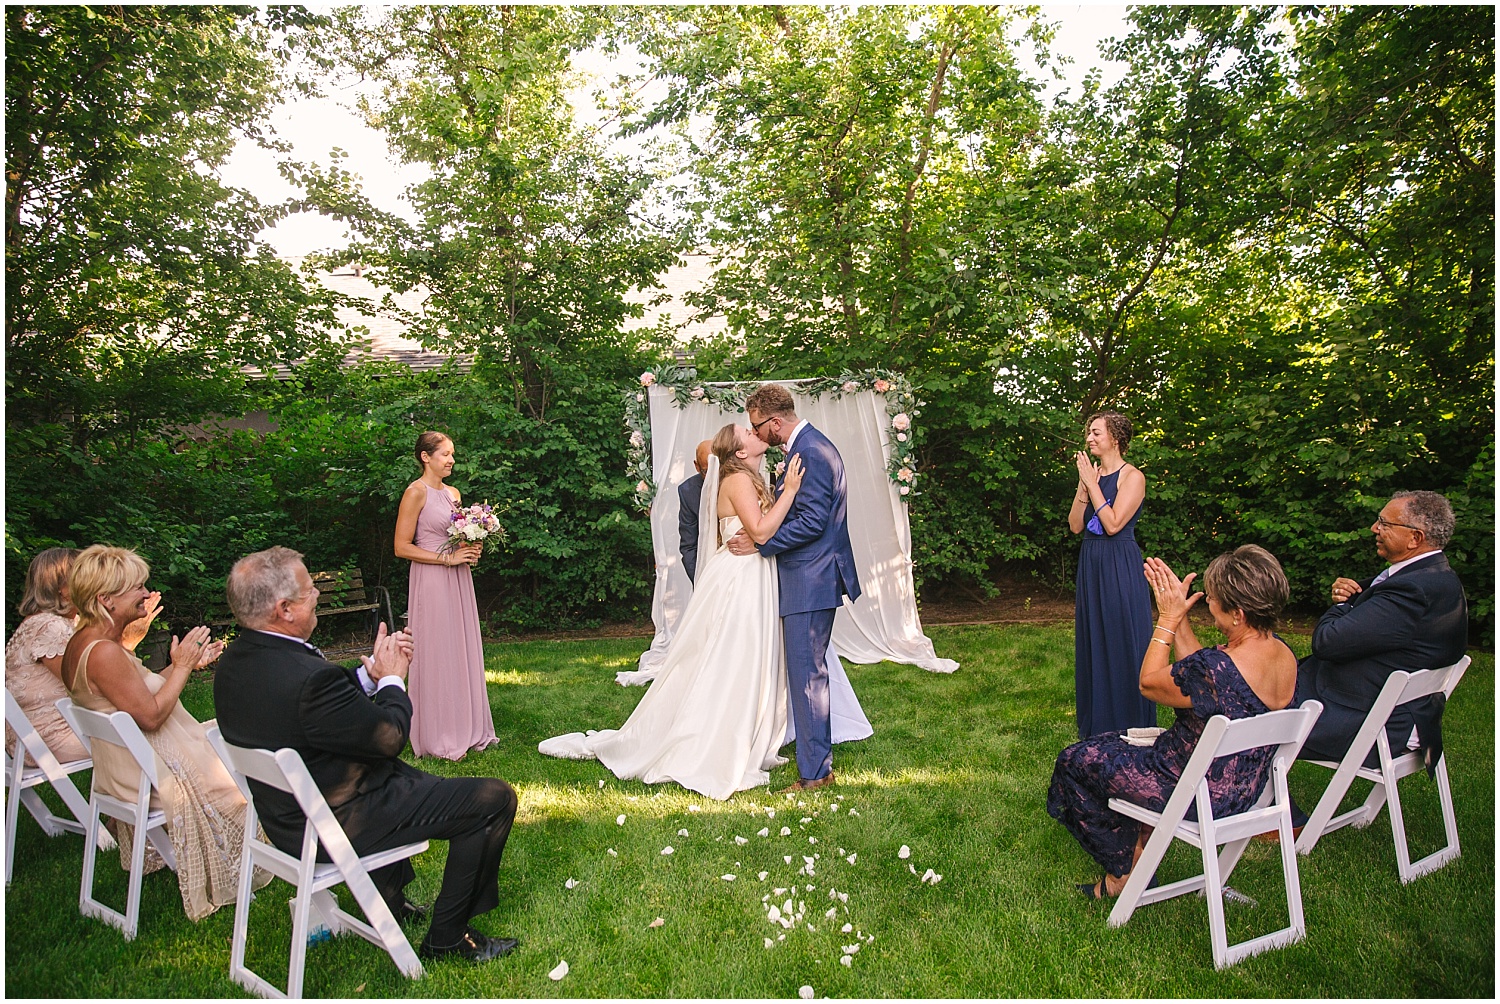 Bride and groom's first kiss at their intimate wedding ceremony